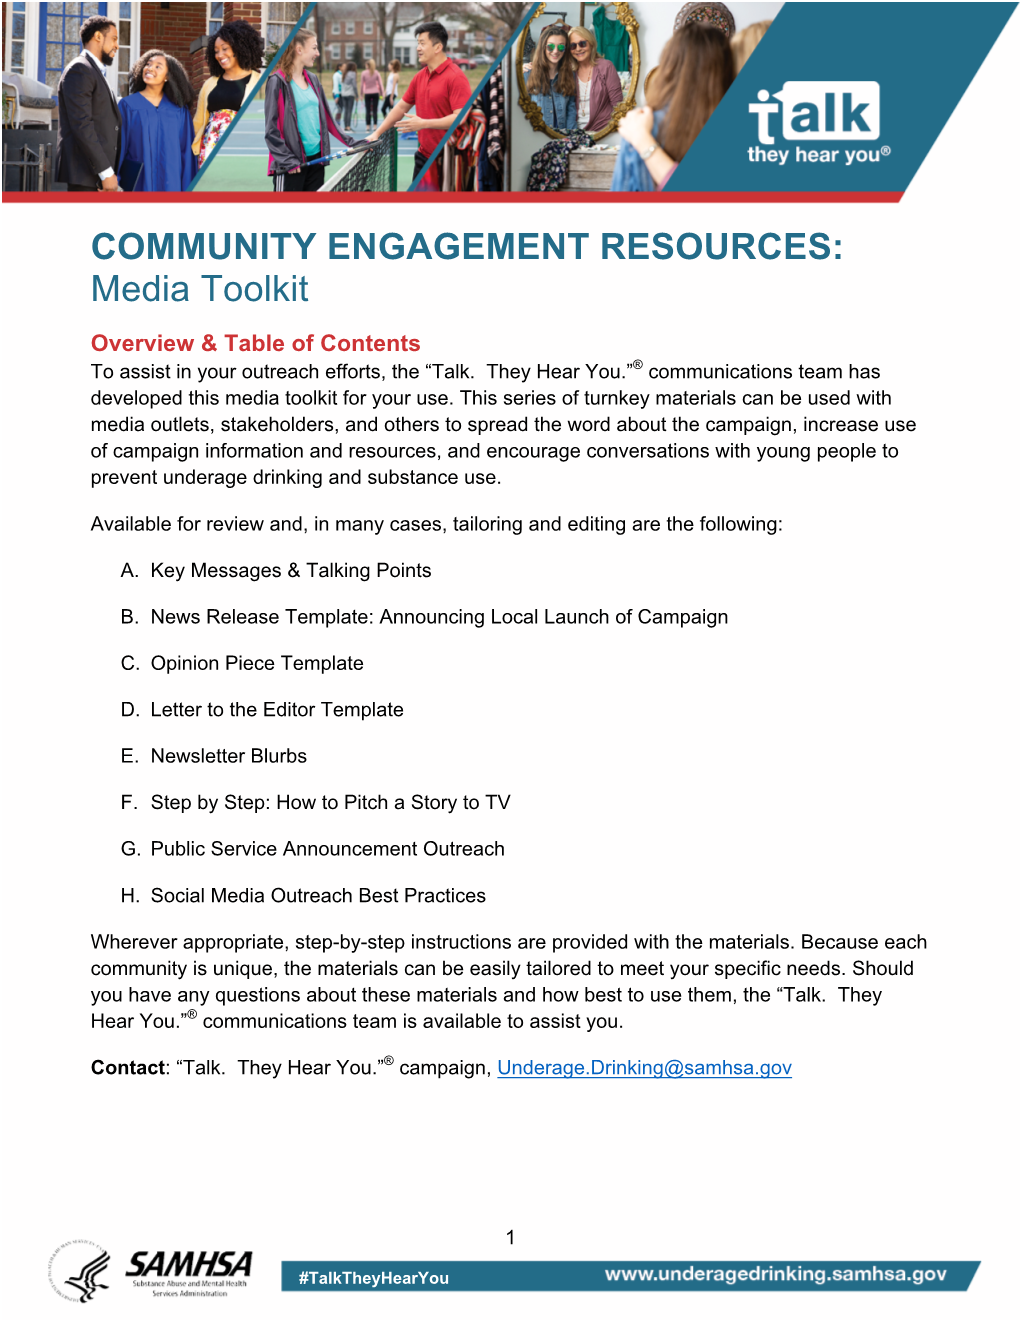 COMMUNITY ENGAGEMENT RESOURCES: Media Toolkit